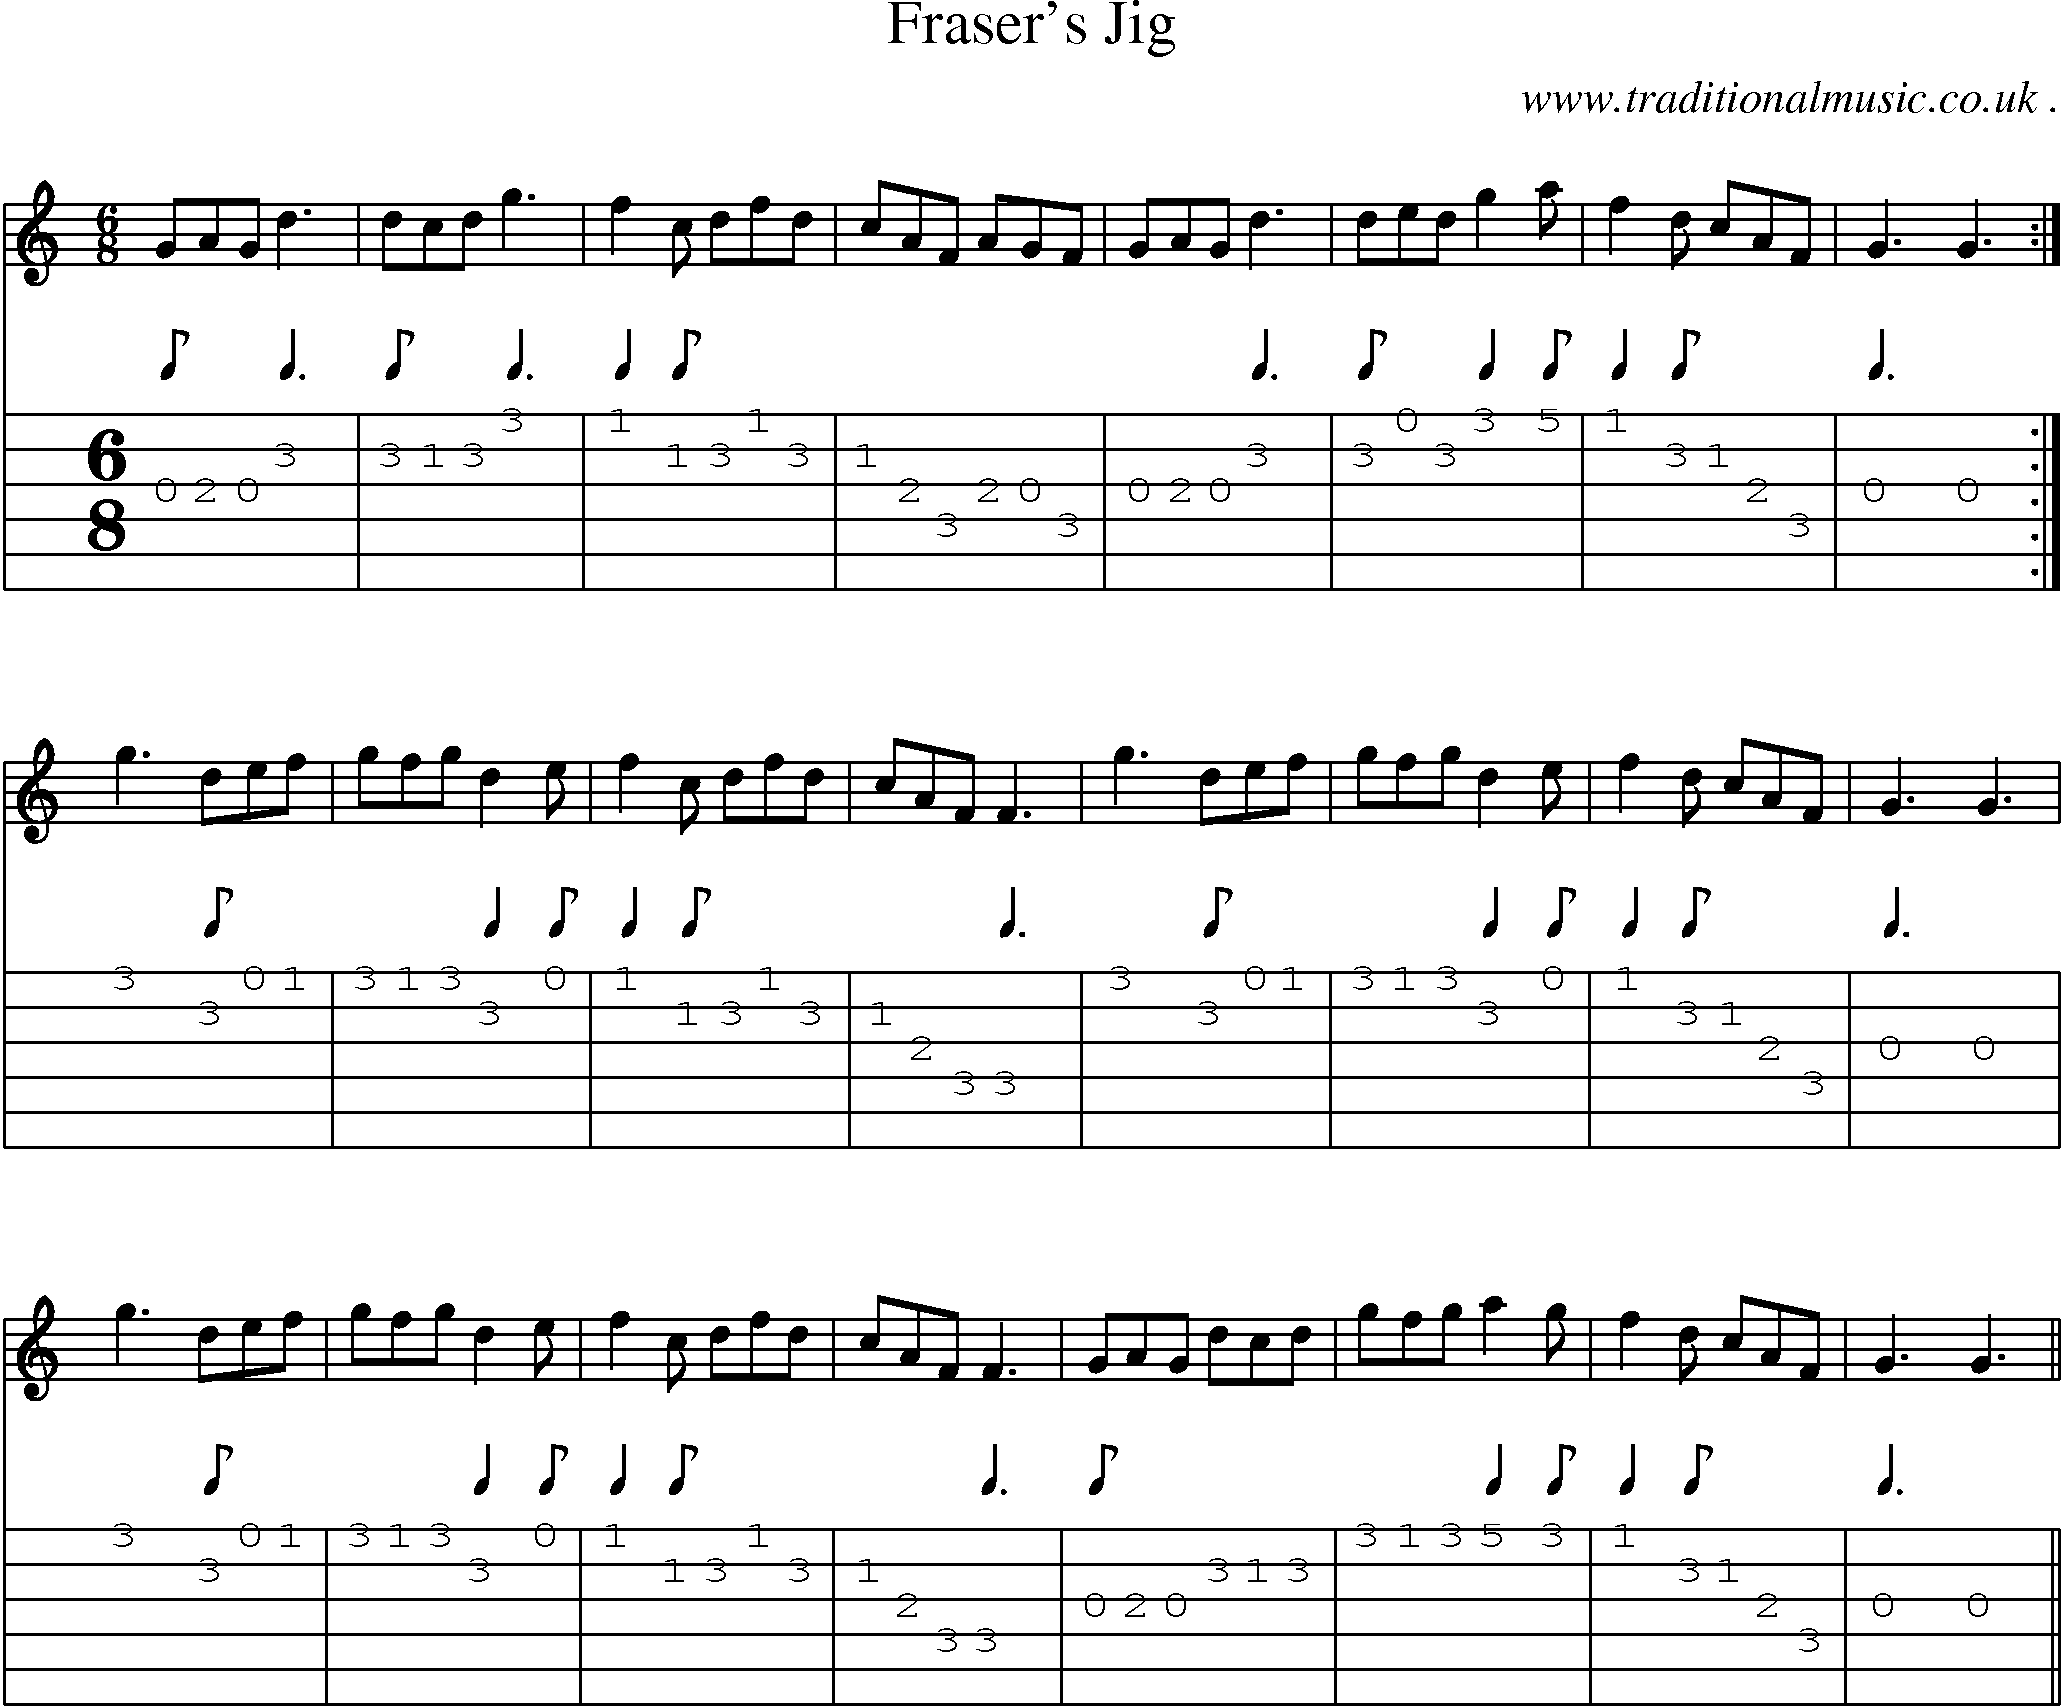 Music Score and Guitar Tabs for Frasers Jig